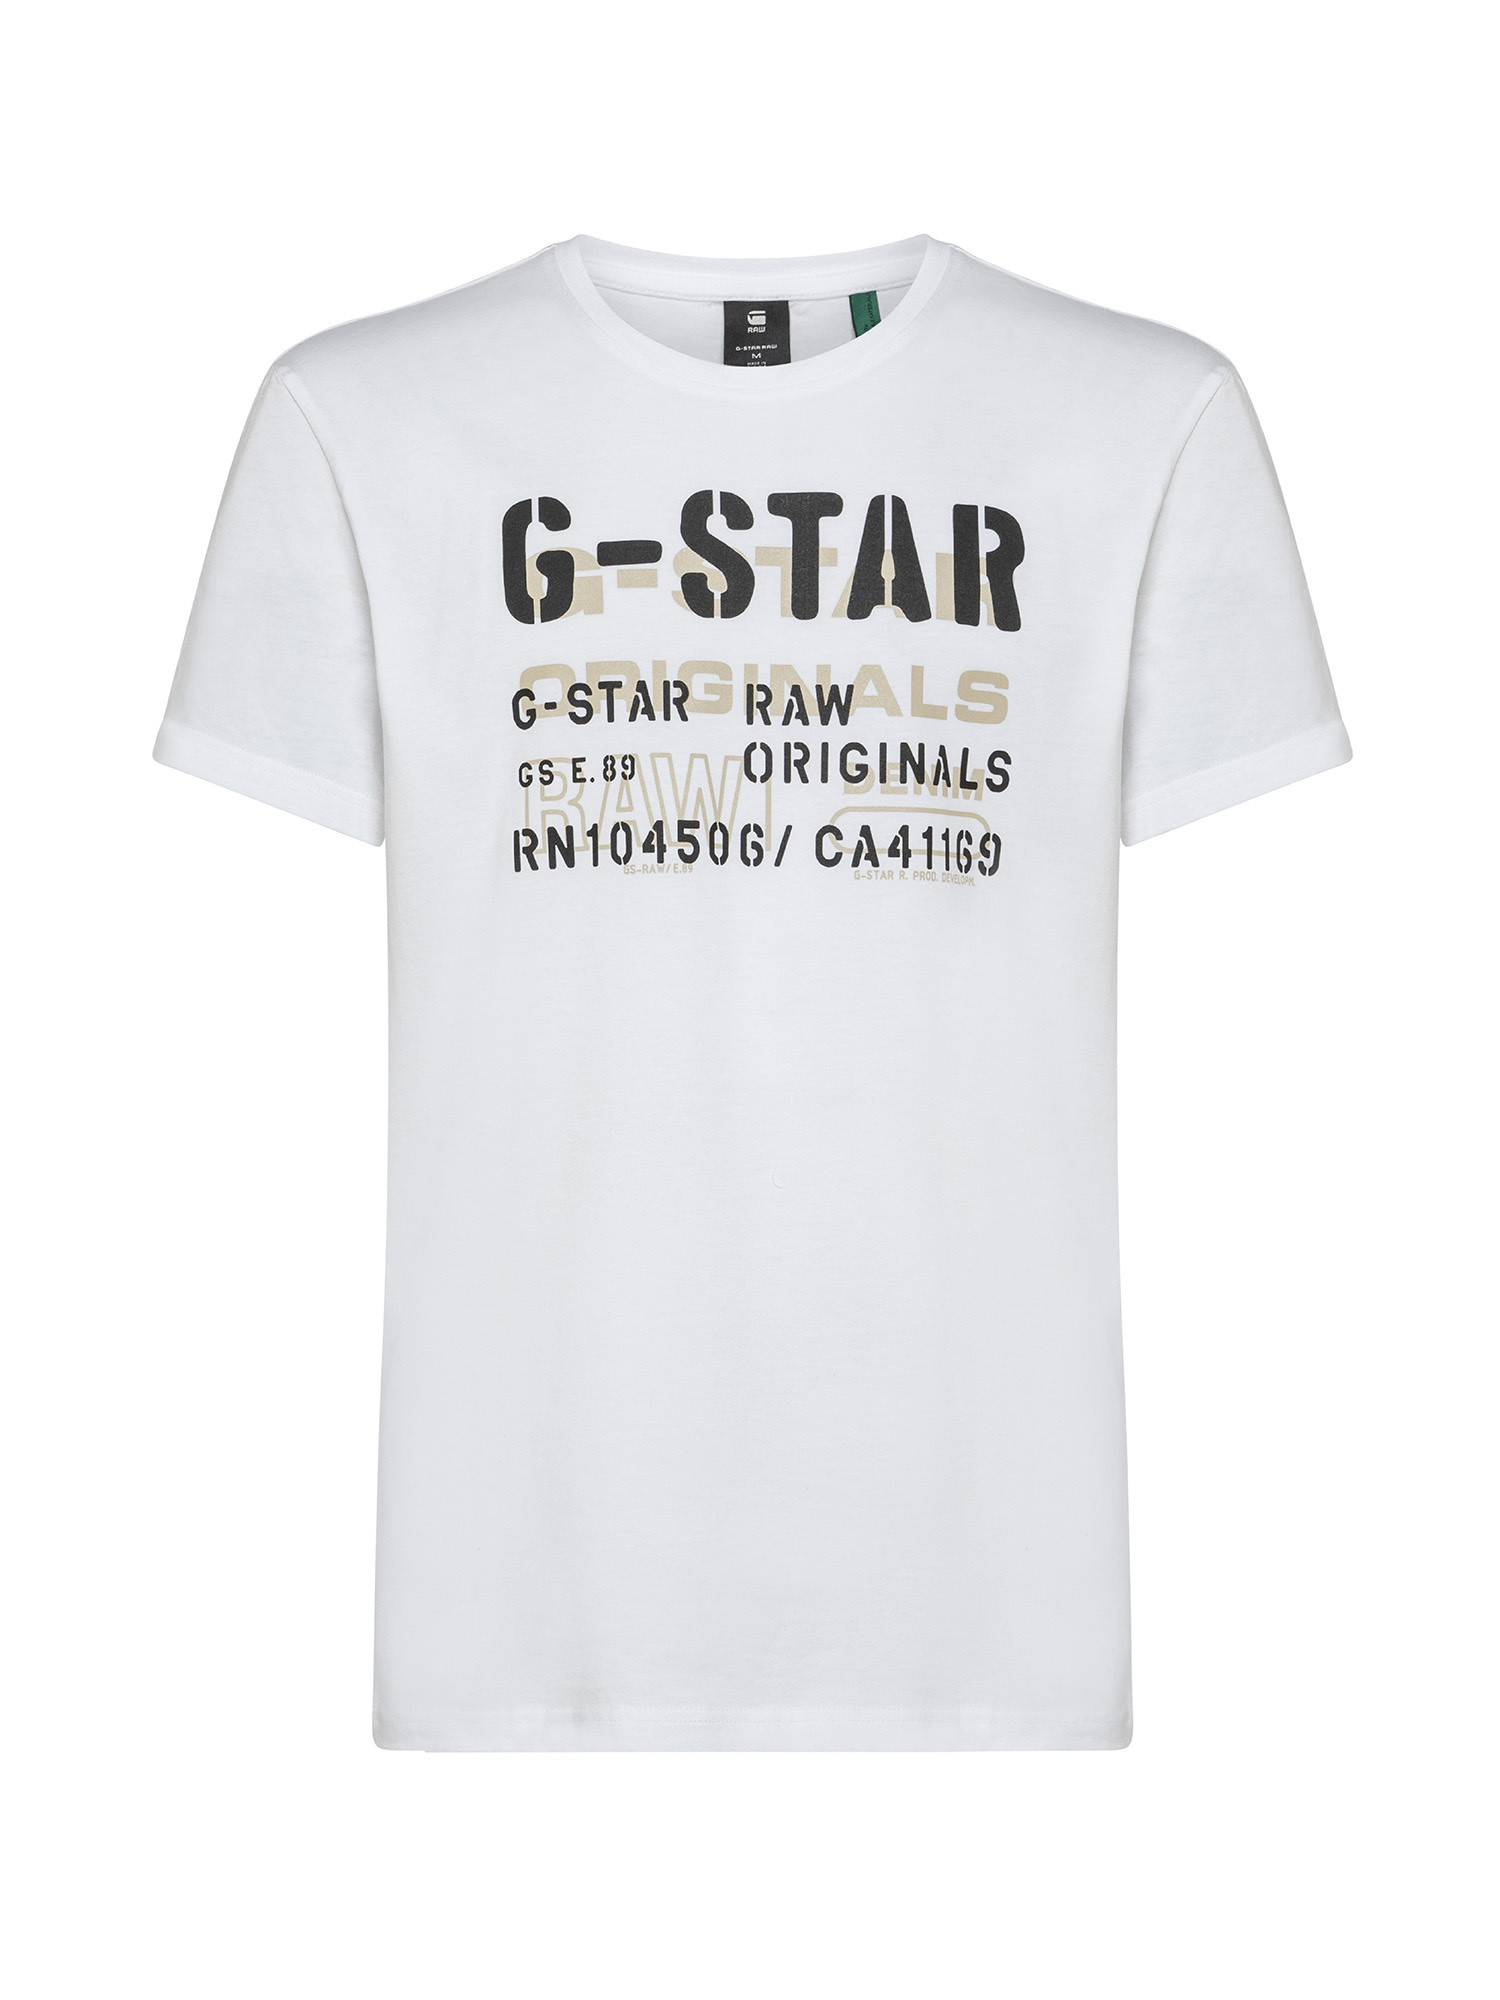 G-Star - T-shirt con stampa, Bianco, large image number 0